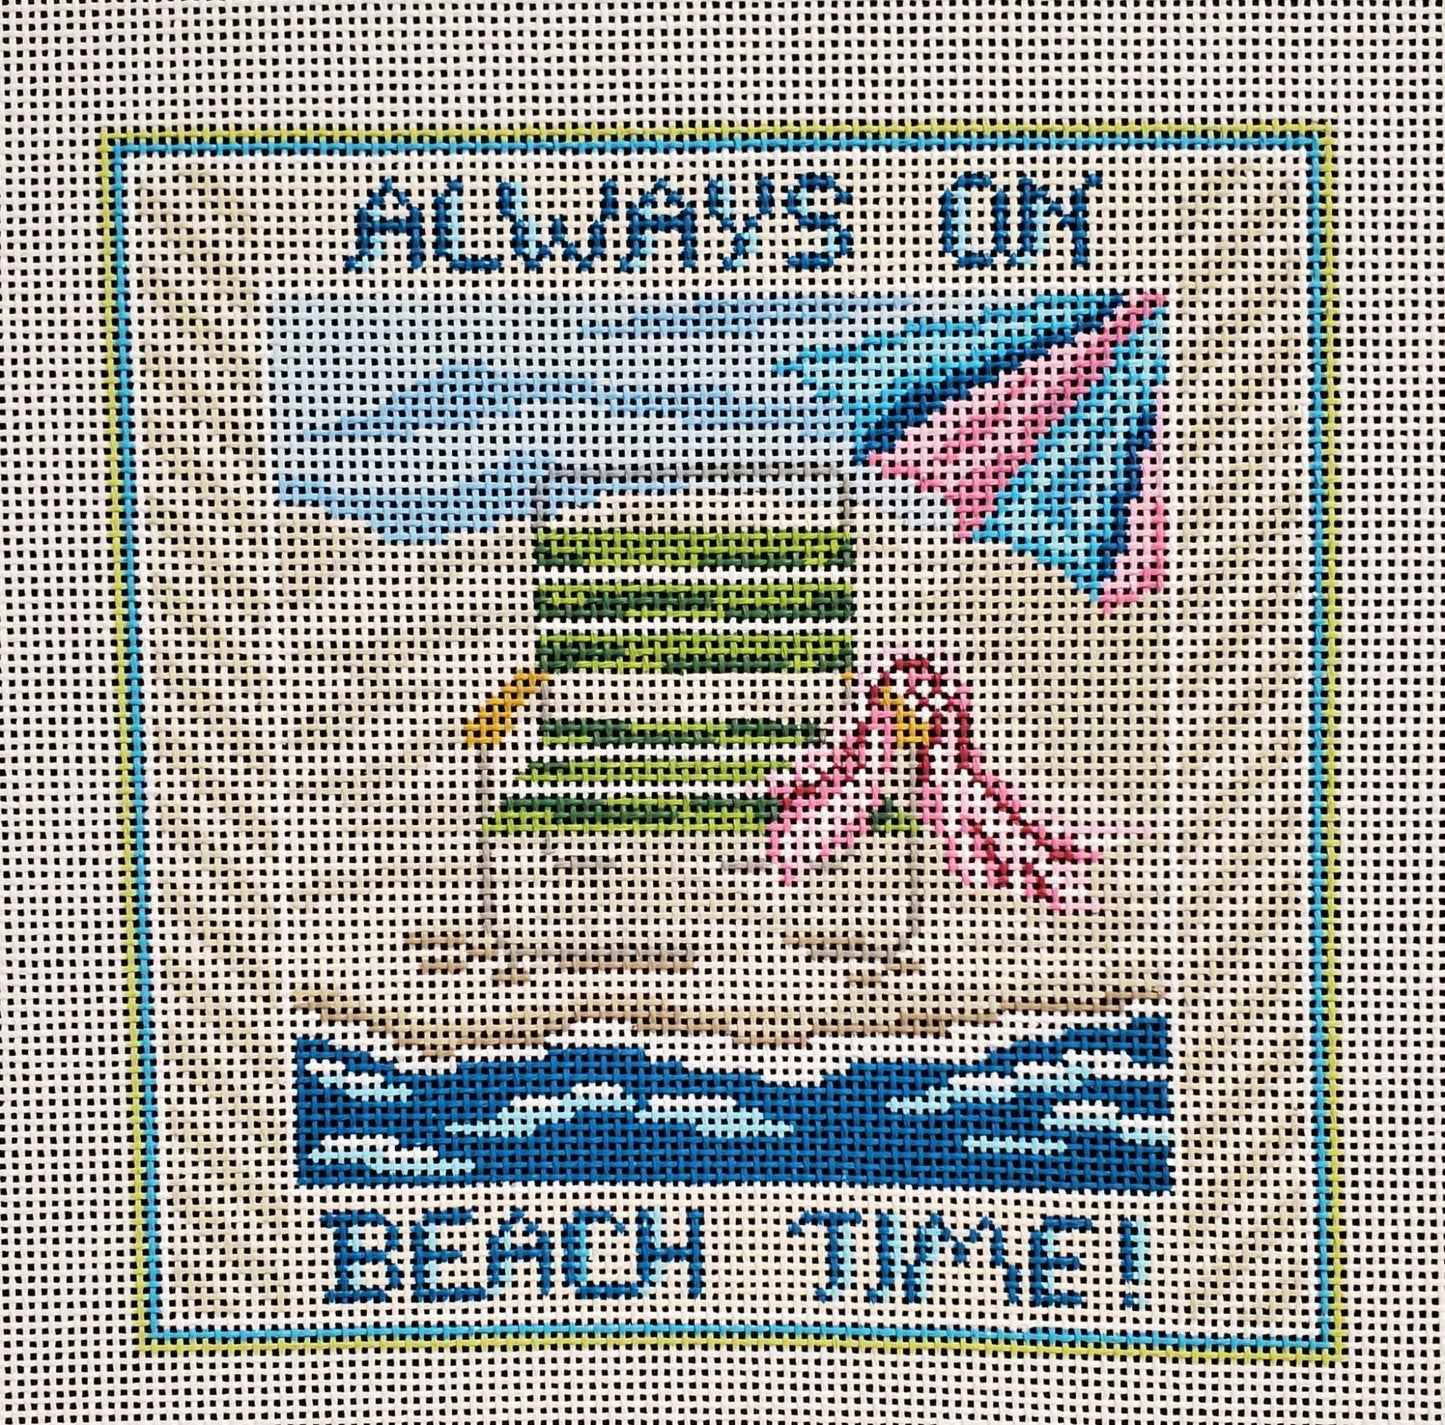 Always on Beach Time - The Flying Needles